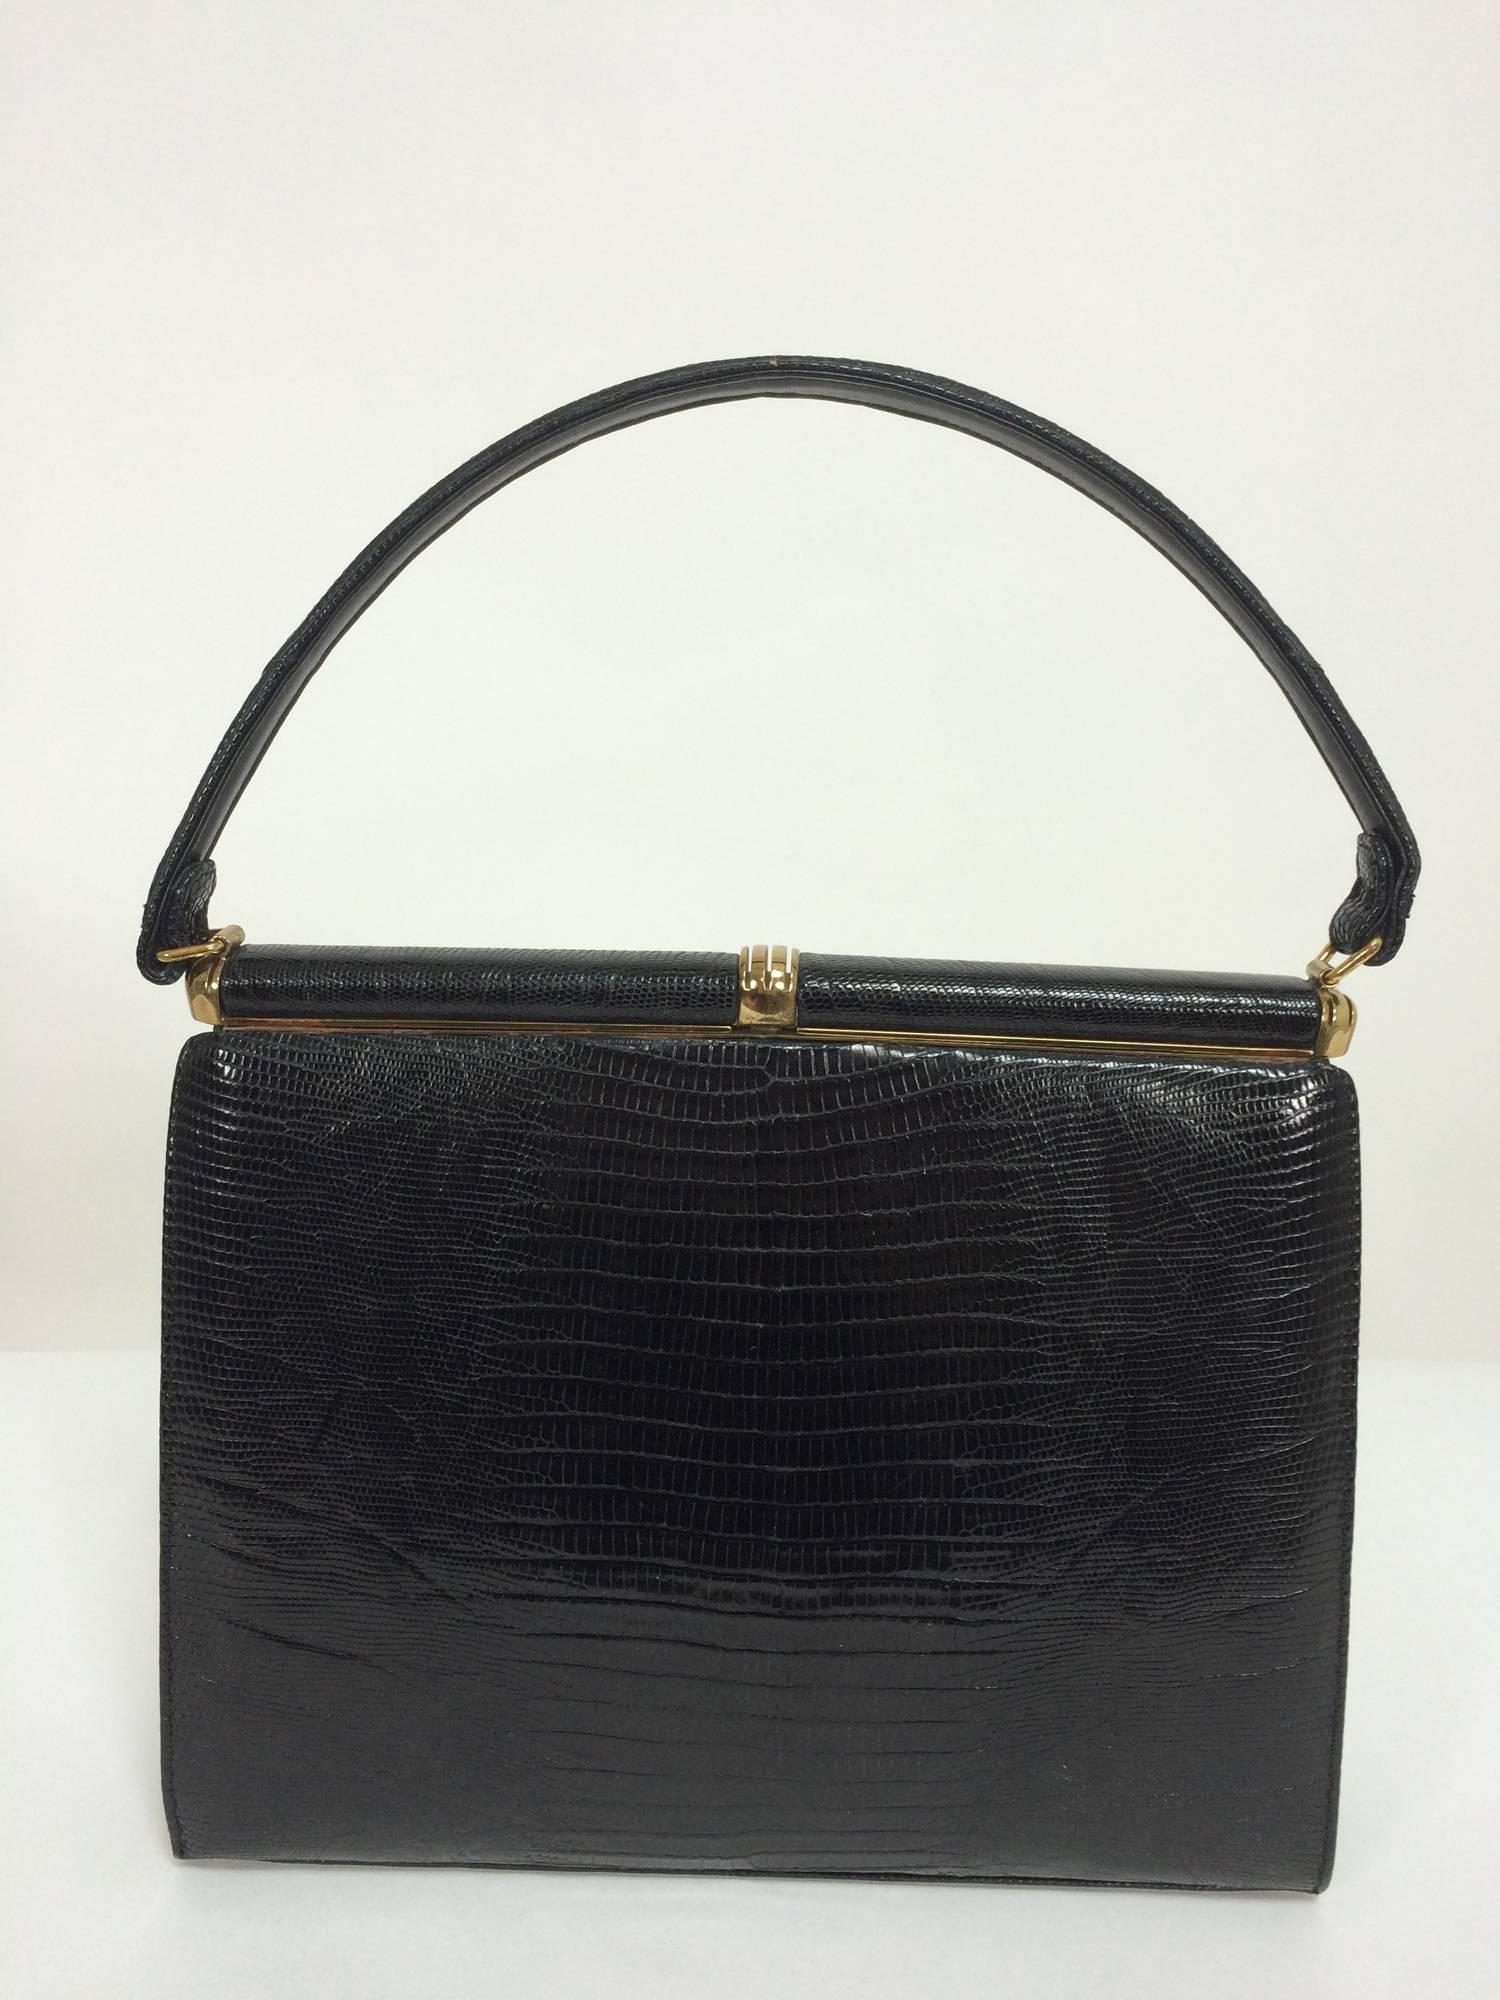 Lucille de Paris glazed black lizard frame handbag 1960s...A beautiful handbag from the early 1960s, with gold hardware and a skin covered frame...The bag features two flap pockets at the front each closing with a hidden snap...There are gold metal